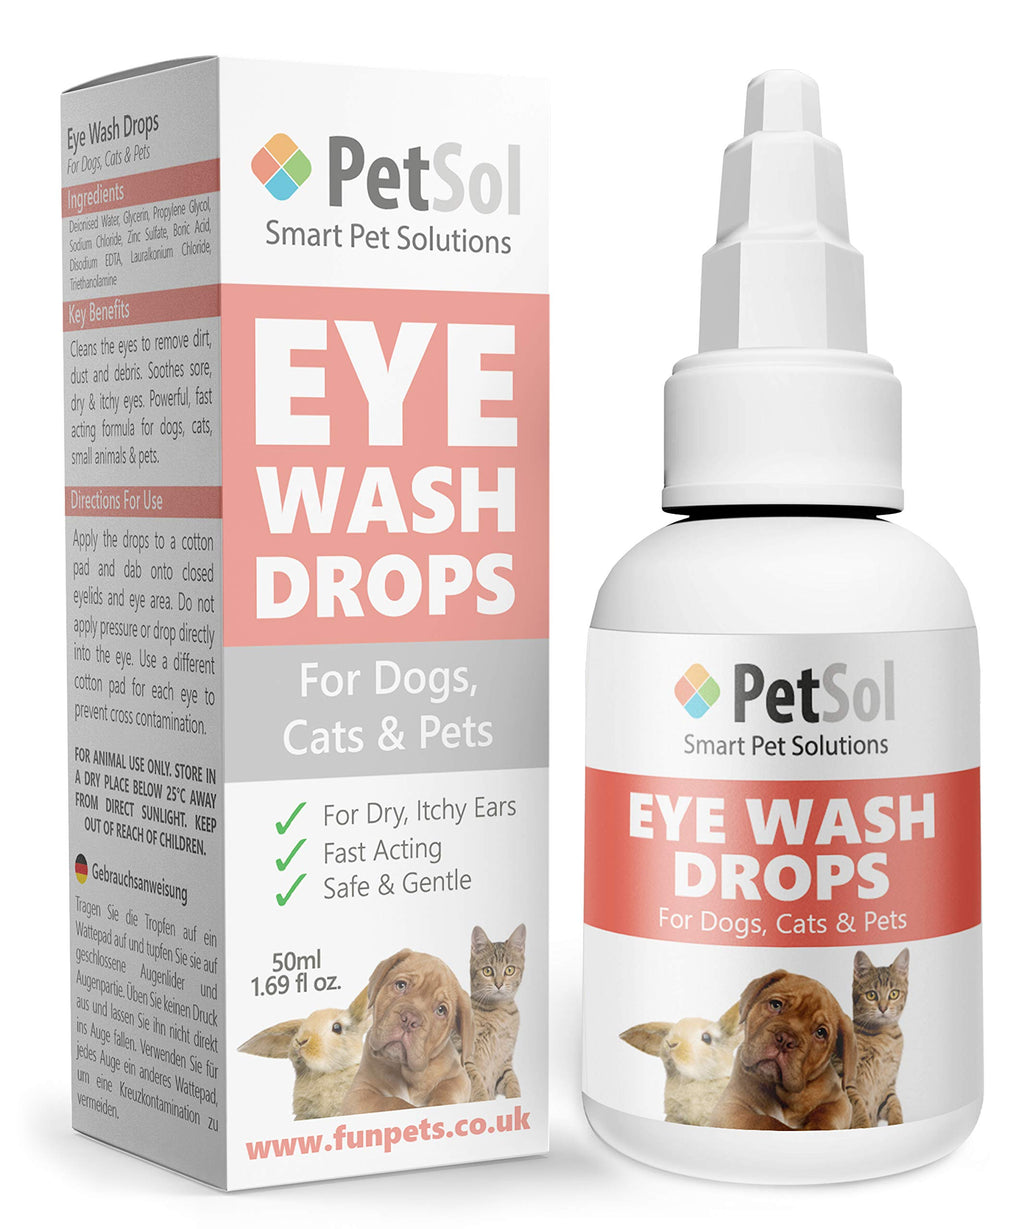 PetSol Eye Wash Drops for Dogs, Cats & Pets (50ml ) for Itchy, Watery, Gunky Eyes. Gentle Lubricating Drops Clean and Protect Dry Eyes – Mild Eye Cleaner Removes Dirt, Dust and Residue